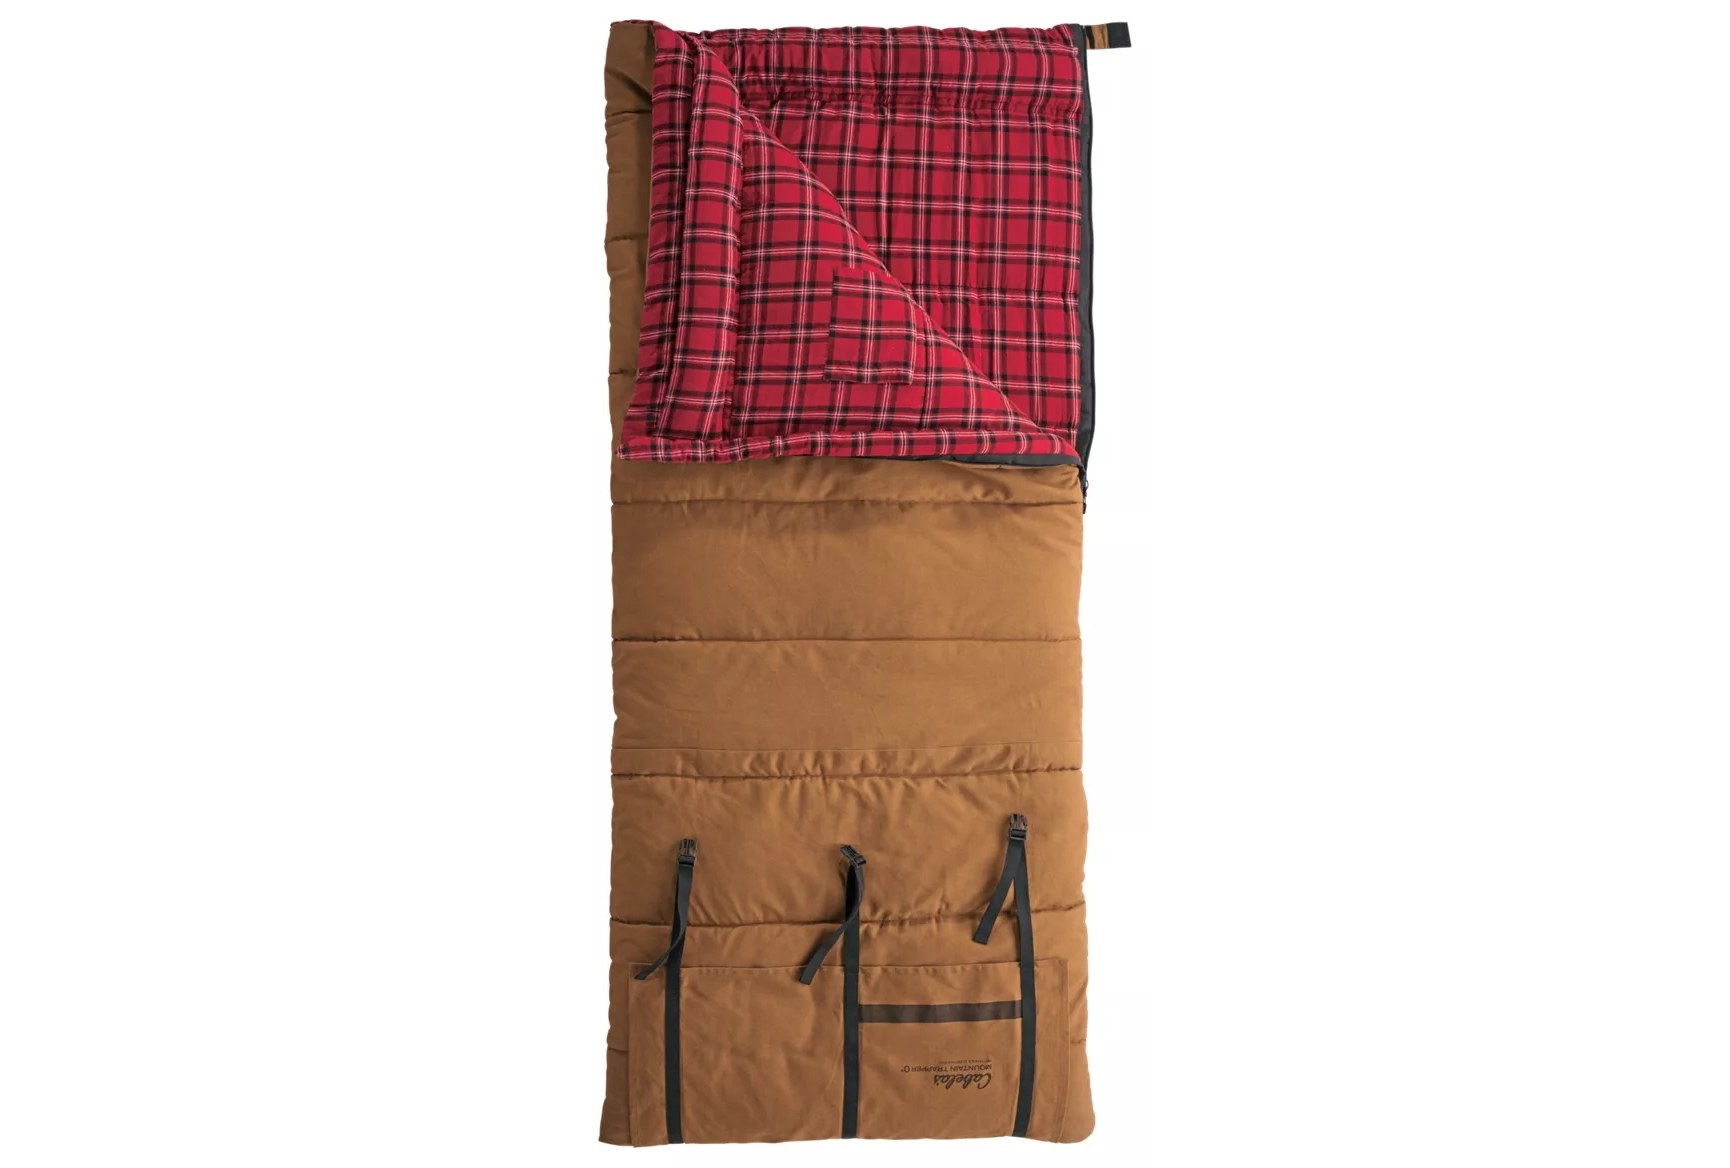 The brown sleeping bag with red plaid interior